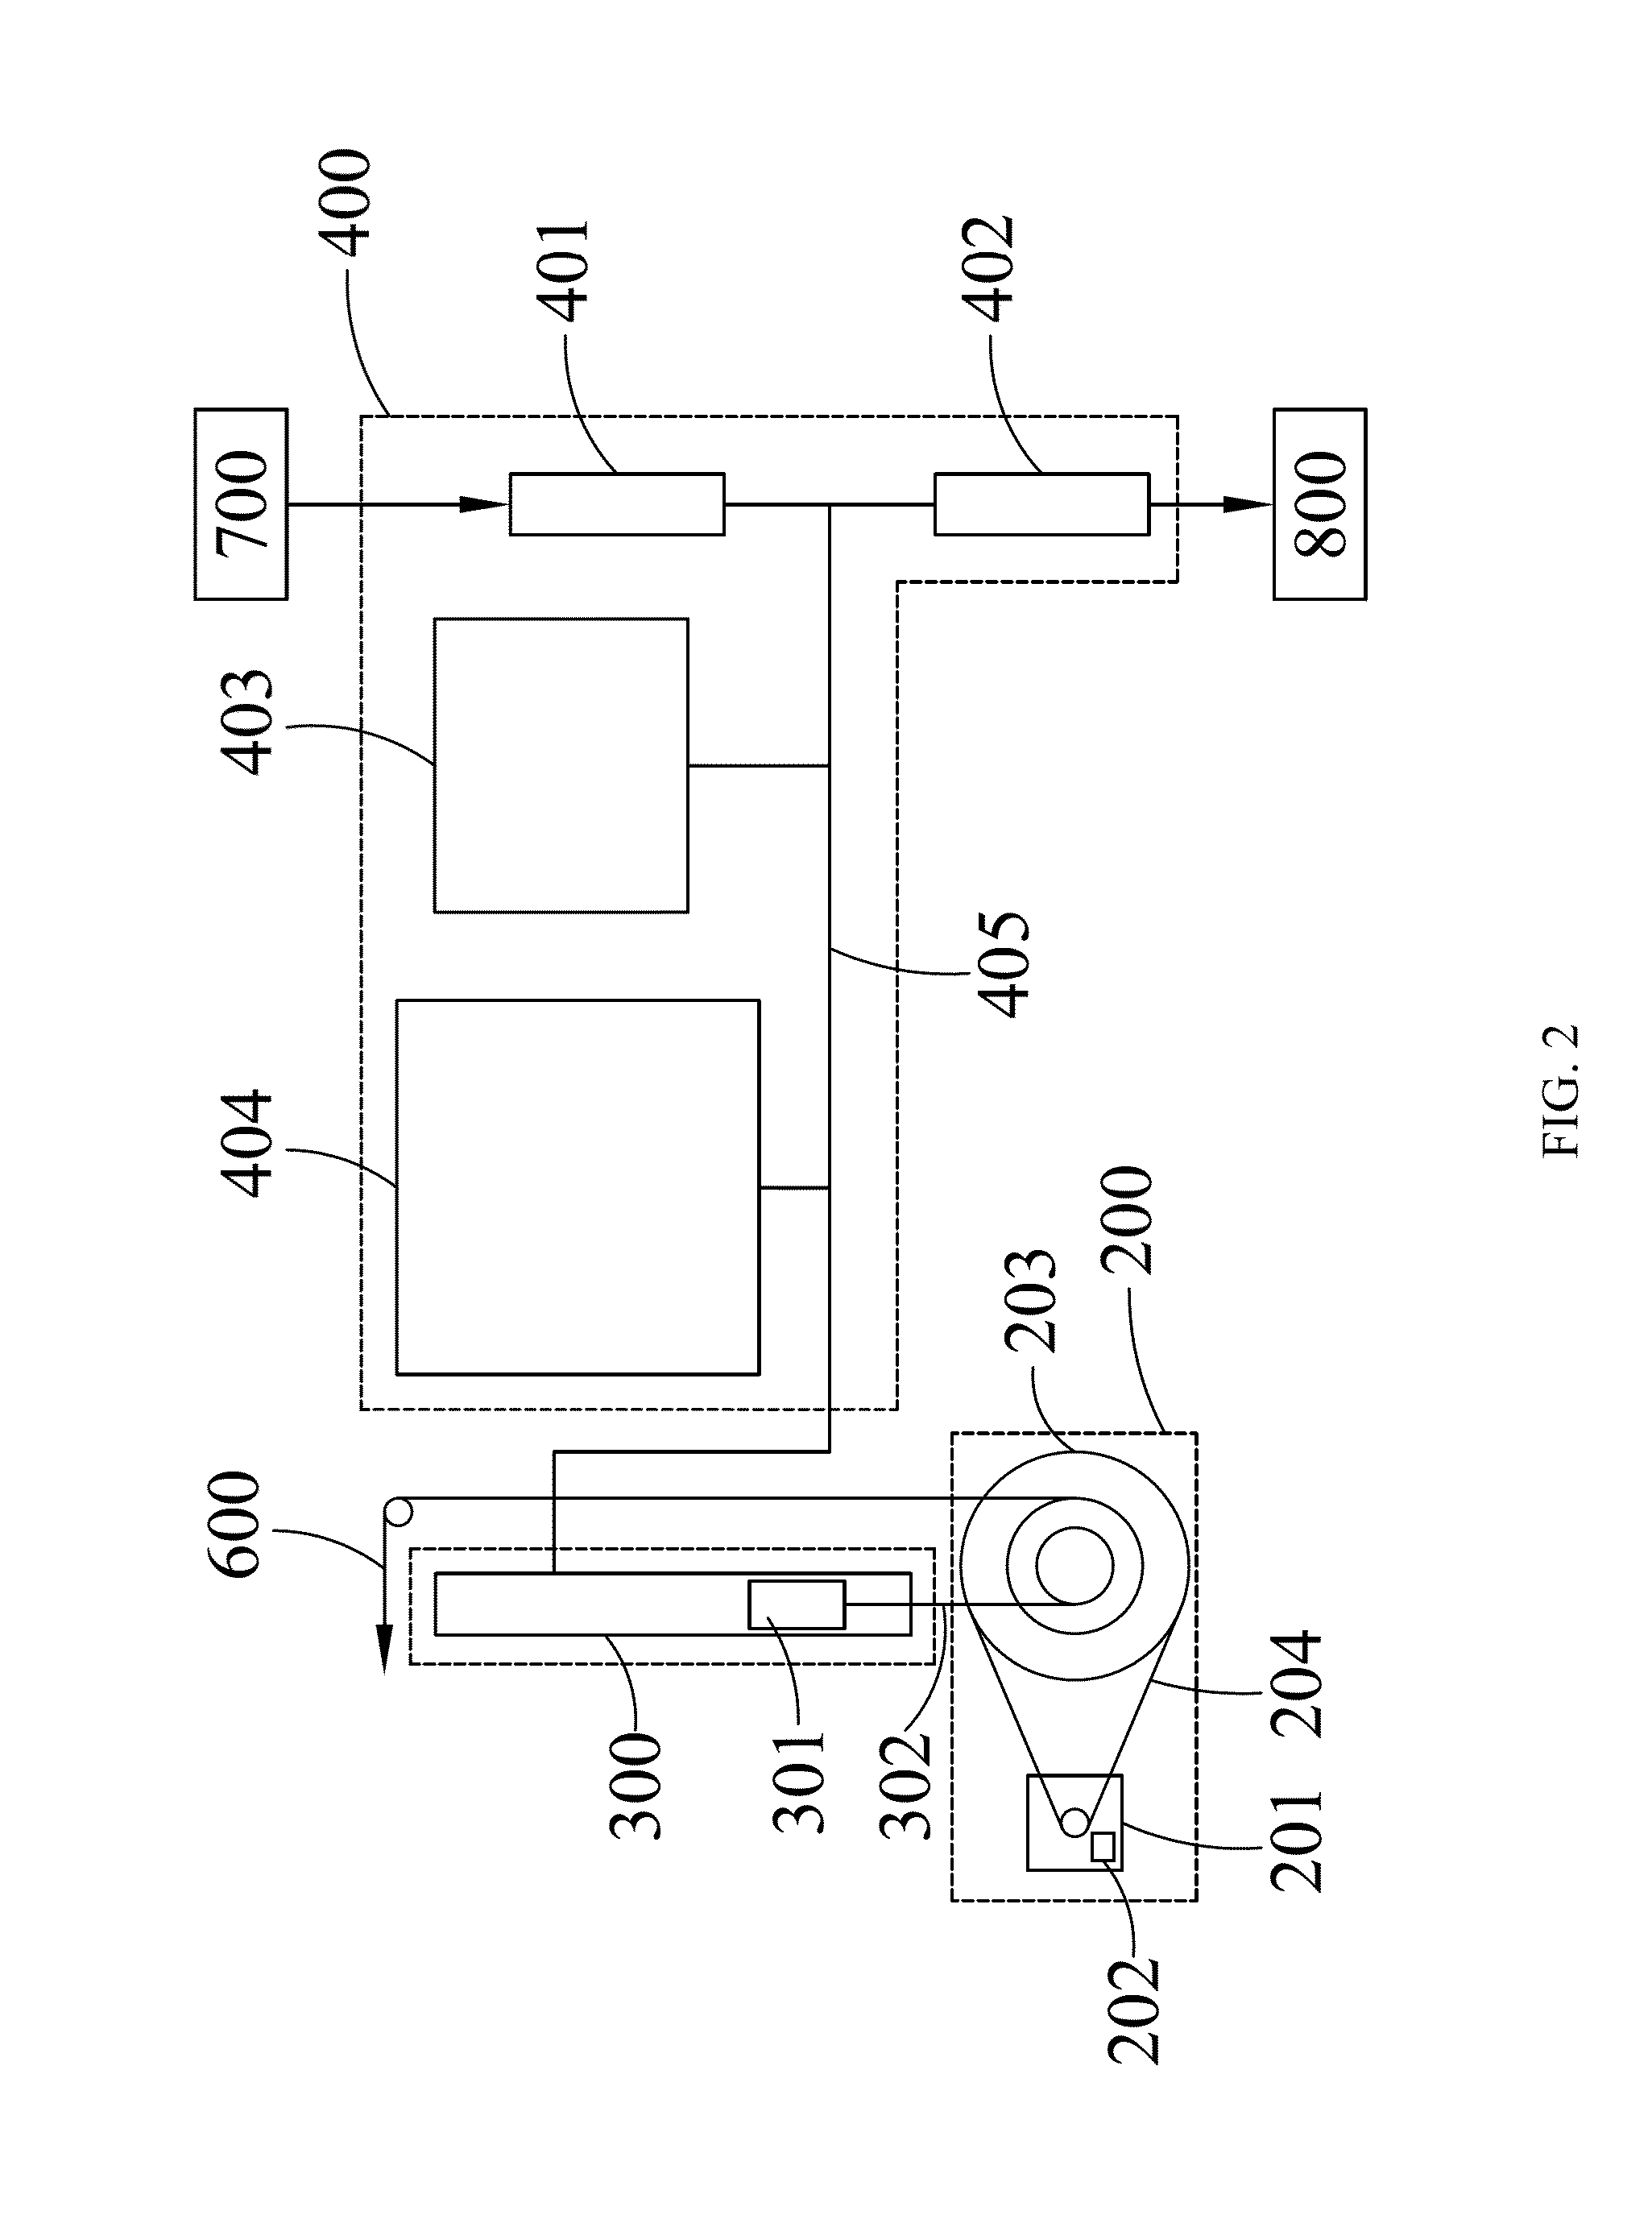 Semi-passive resistance force control system with active augmentation